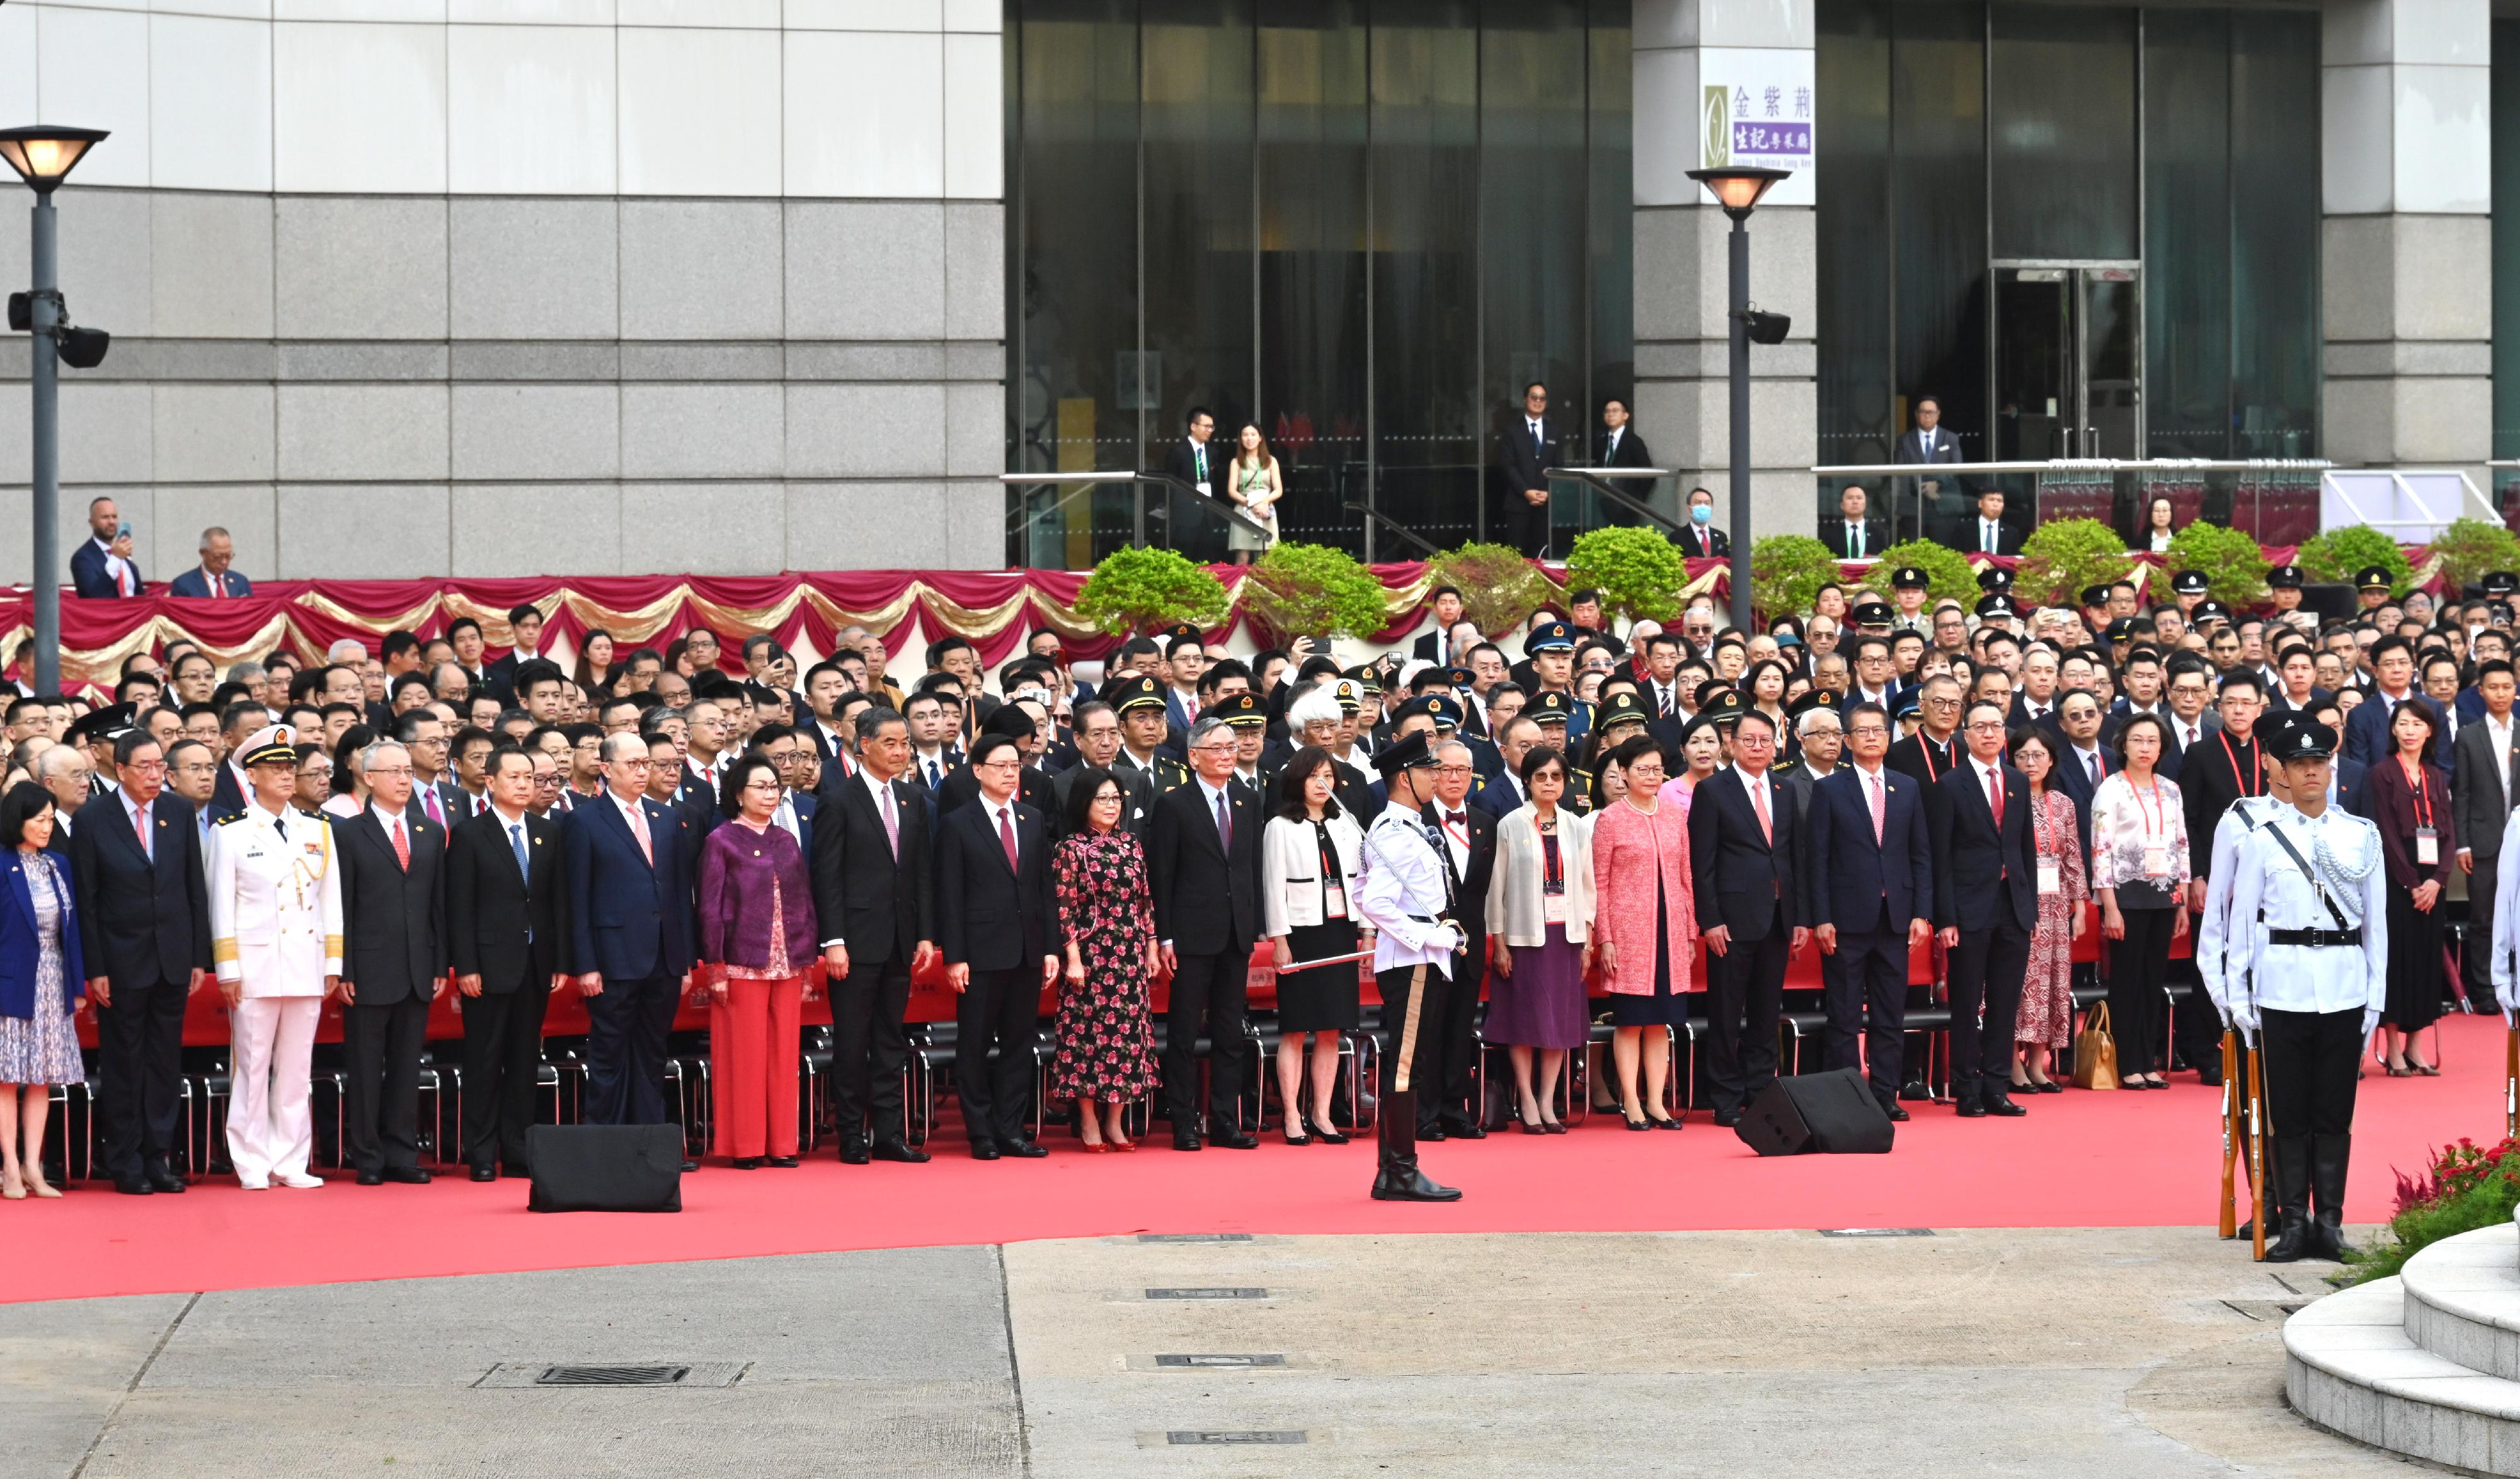 The Chief Executive, Mr John Lee(front row, 9th left), his wife(front row, 9th right);Chief Justice of the Court of Final Appeal, Mr Andrew Cheung Kui-nung(front row, 8th right), and his wife(front row, 7th right);former CE Mr Donald Tsang(front row, 6th right) and his wife(front row, 5th right);Vice-Chairman of the National Committee of the CPPCC Mr C Y Leung(front row, 8th left), and his wife(front row, 7th left);former CE Mrs Carrie Lam(front row, 4th right);Director of the Liaison Office of the Central People's Government(CPG) in the HKSAR, Mr Zheng Yanxiong(front row, 6th left);Head of the Office for Safeguarding National Security of the CPG in the HKSAR, Mr Dong Jingwei(front row, 5th left);Acting Commissioner of the Office of the Commissioner of the Ministry of Foreign Affairs of the People's Republic of China in the HKSAR, Mr Li Yongsheng(front row, 4th left);Political Commissar of the Chinese People's Liberation Army Hong Kong Garrison, Navy Rear Admiral Lai Ruxin(front row, 3rd left);Chief Secretary for Administration, Mr Chan Kwok-ki(front row, 3rd right);Financial Secretary, Mr Paul Chan(front row, 2nd right);Secretary for Justice, Mr Paul Lam, SC(front row, 1st right);President of the Legislative Council, Mr Andrew Leung(front row, 2nd left);Convenor of the Non-official Members of the Executive Council, Mrs Regina Ip(front row, 1st left), together with Principal Officials and guests, attend the flag-raising ceremony for the 74th anniversary of the founding of the People's Republic of China at Golden Bauhinia Square in Wan Chai this morning (October 1).